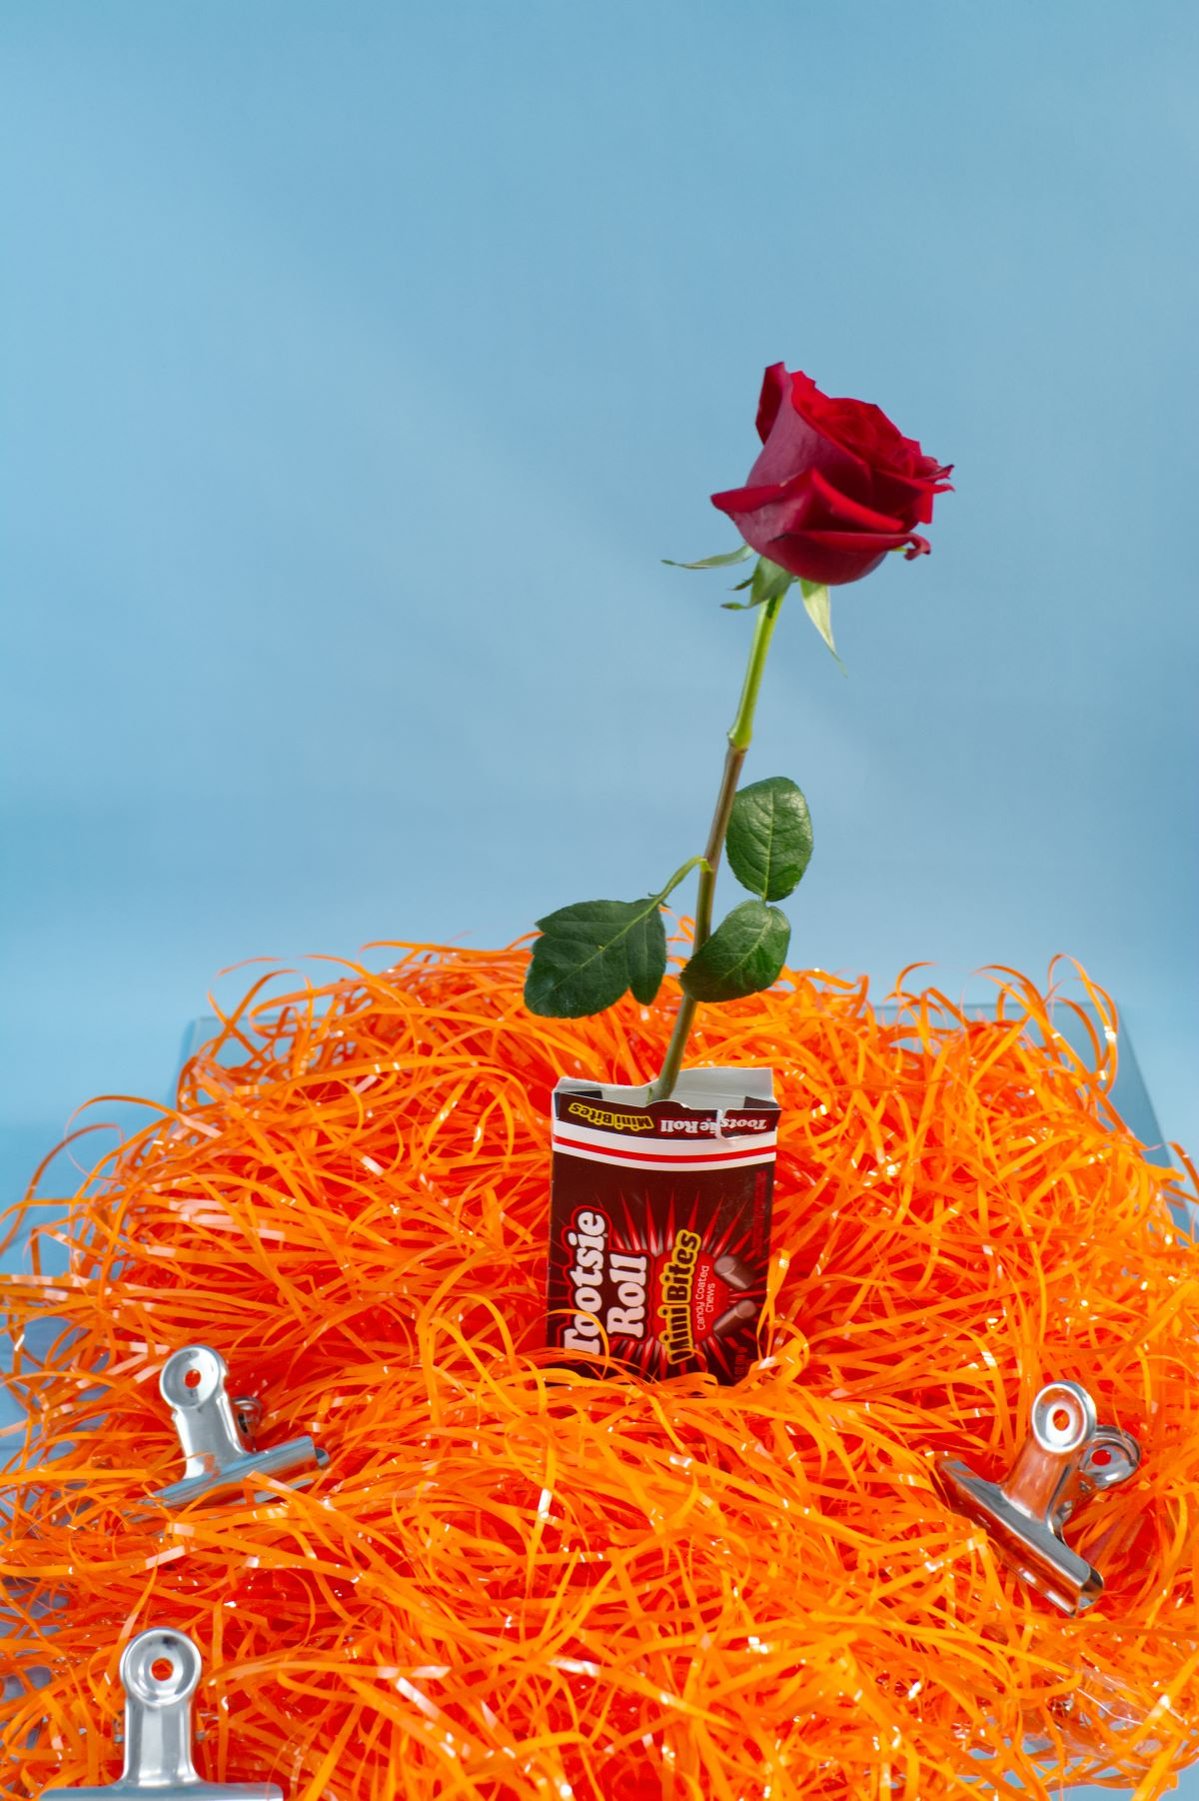 Love and Orange Things by Sherry Paddon.
Still life featuring a red rose in a tootsie roll box and orange streamers surrounded by clips.